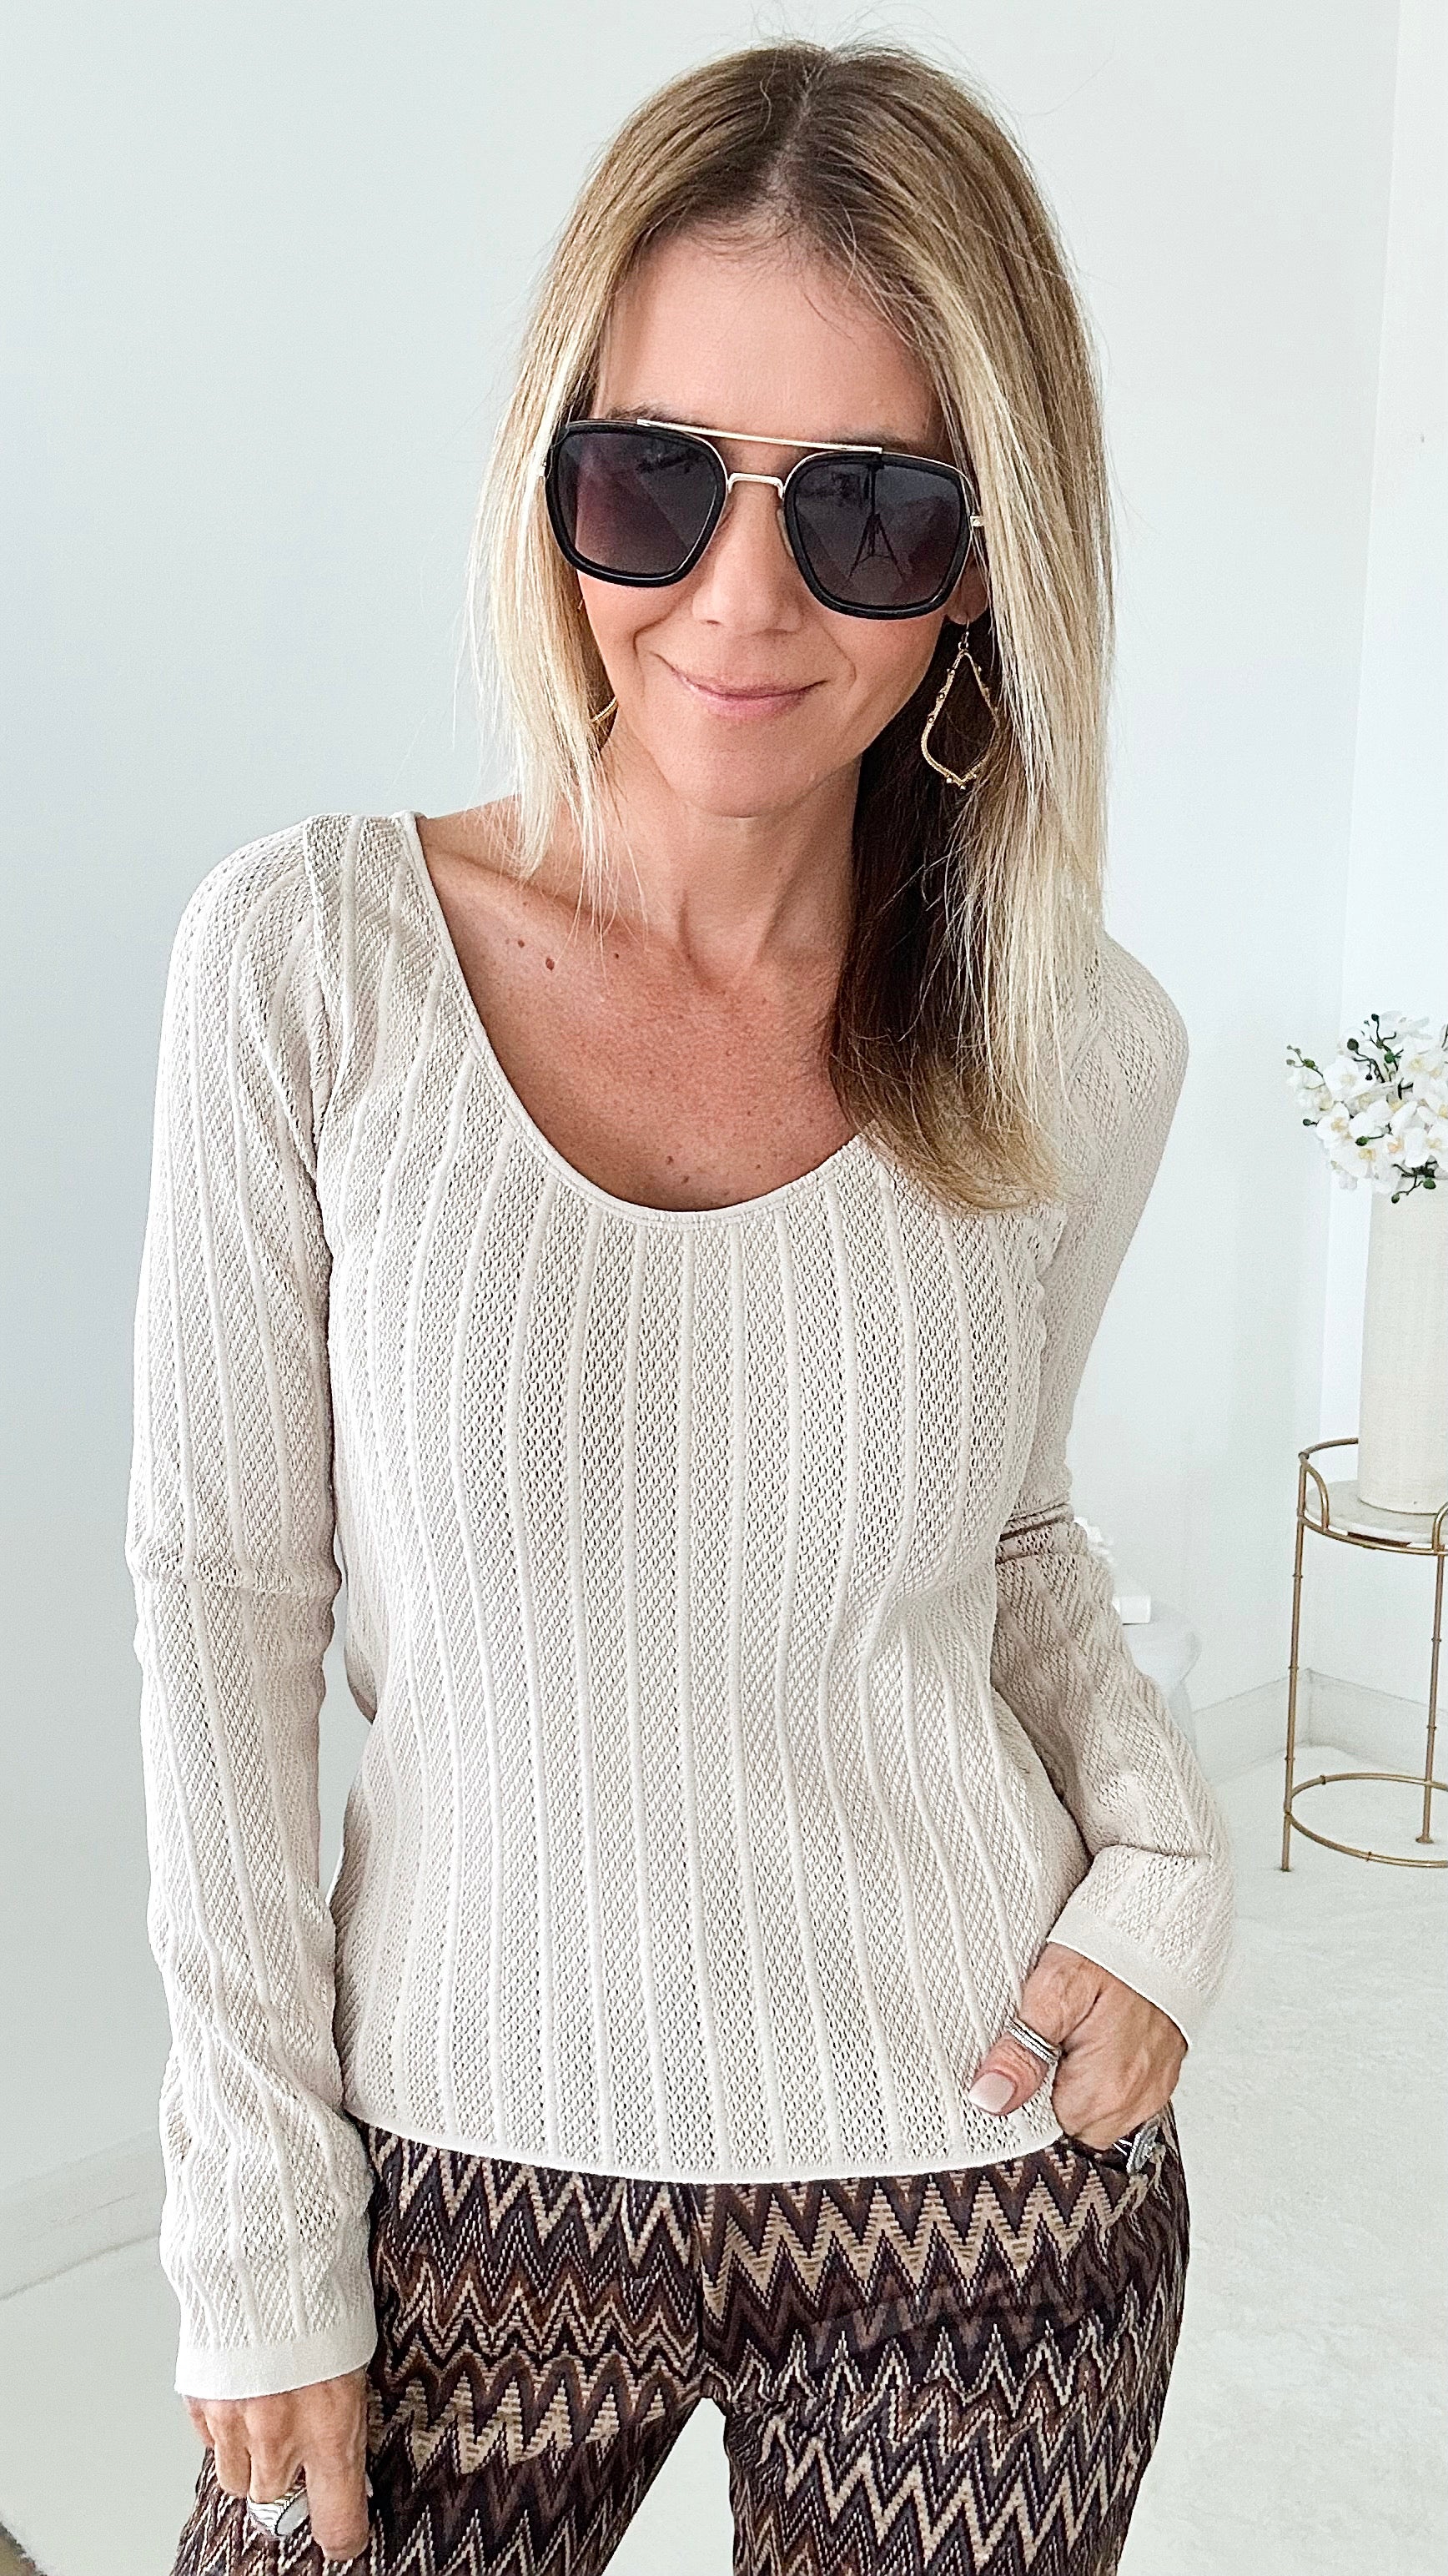 Brazilian U Neck Textured & Stripes Long Sleeve-220 Intimates-VZ Group-Coastal Bloom Boutique, find the trendiest versions of the popular styles and looks Located in Indialantic, FL